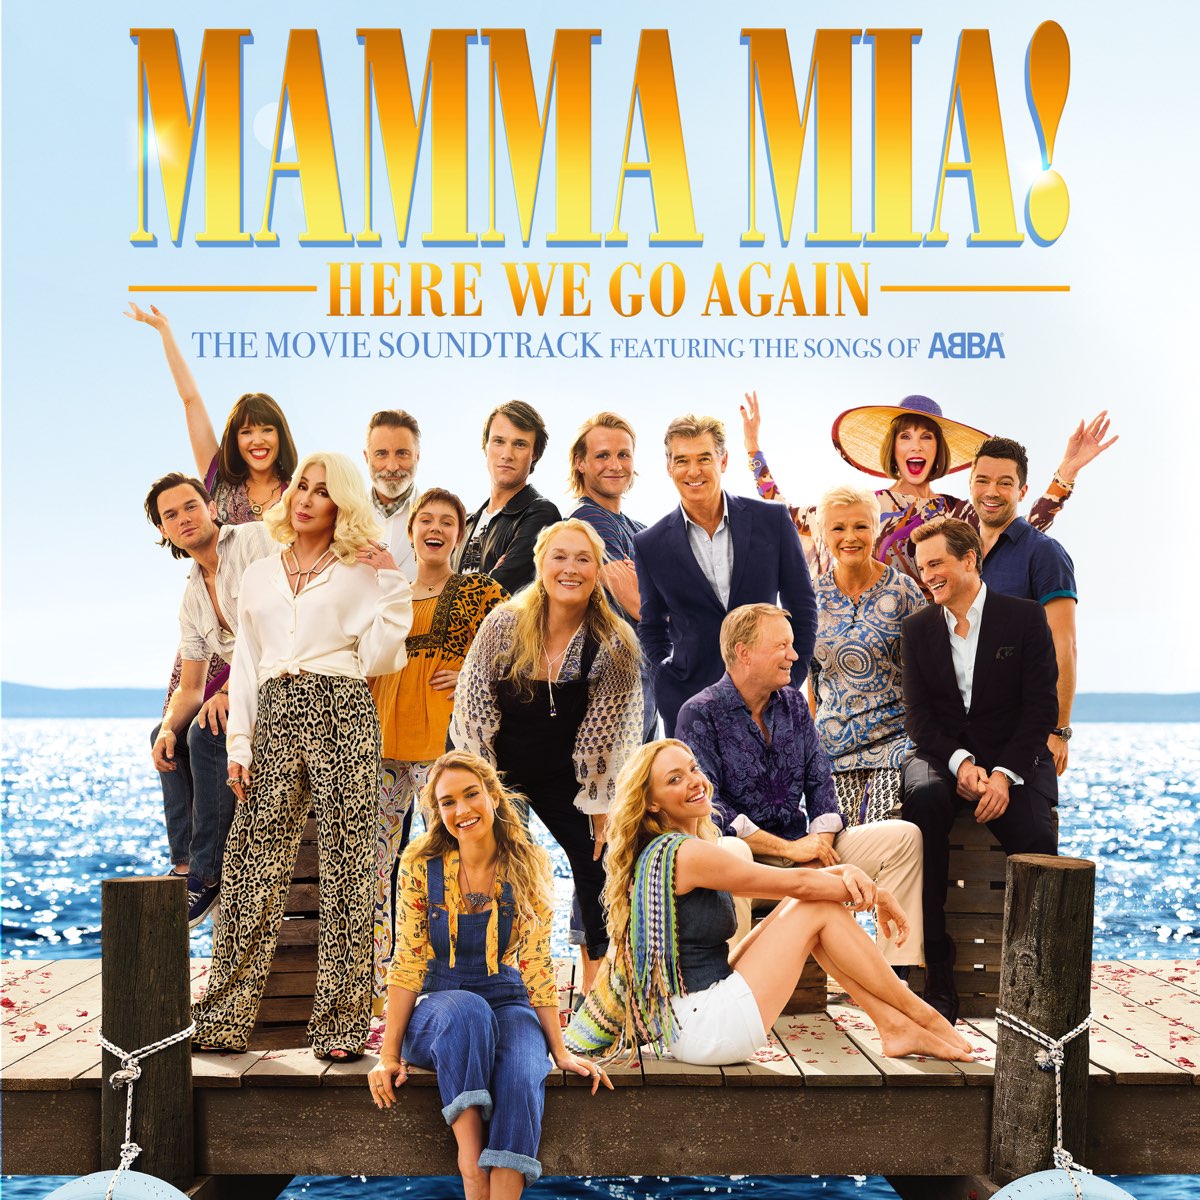 Mamma Mia! Here We Go Again (The Movie Soundtrack feat. the Songs of ABBA)  - Album by Benny Andersson, Björn Ulvaeus & Lily James - Apple Music